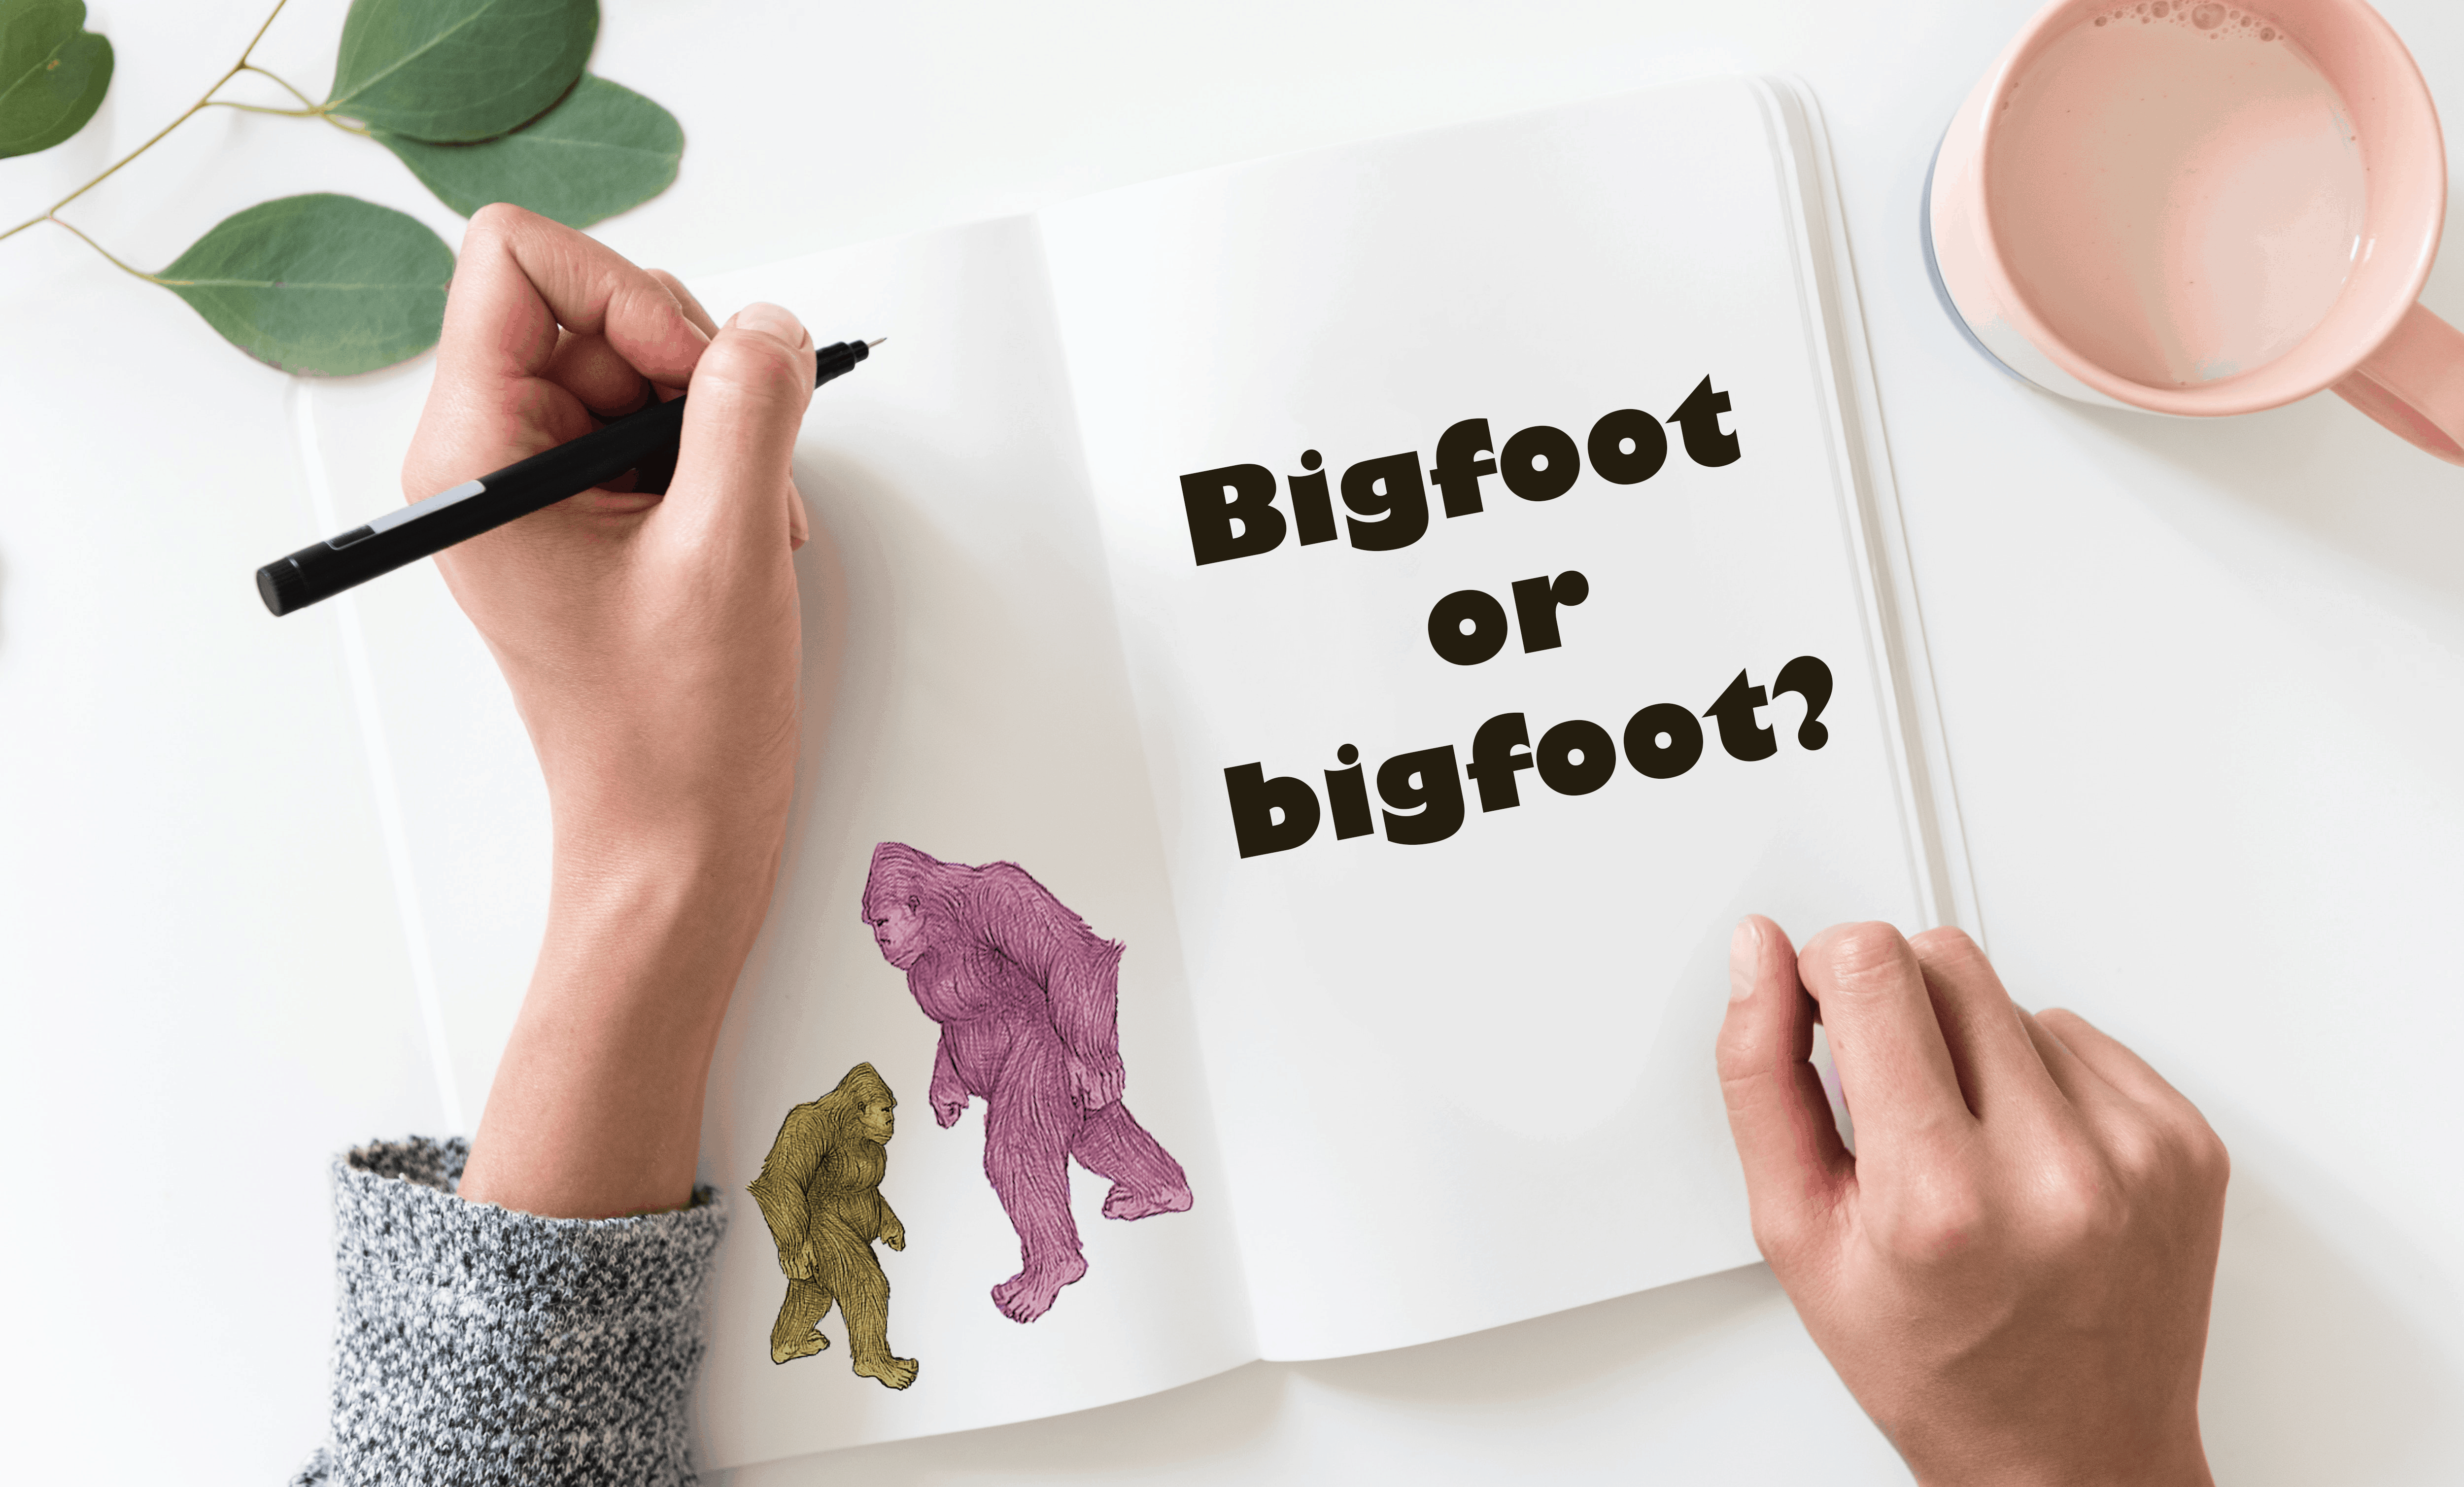 A journal with Bigfoot and bigfoot written in it